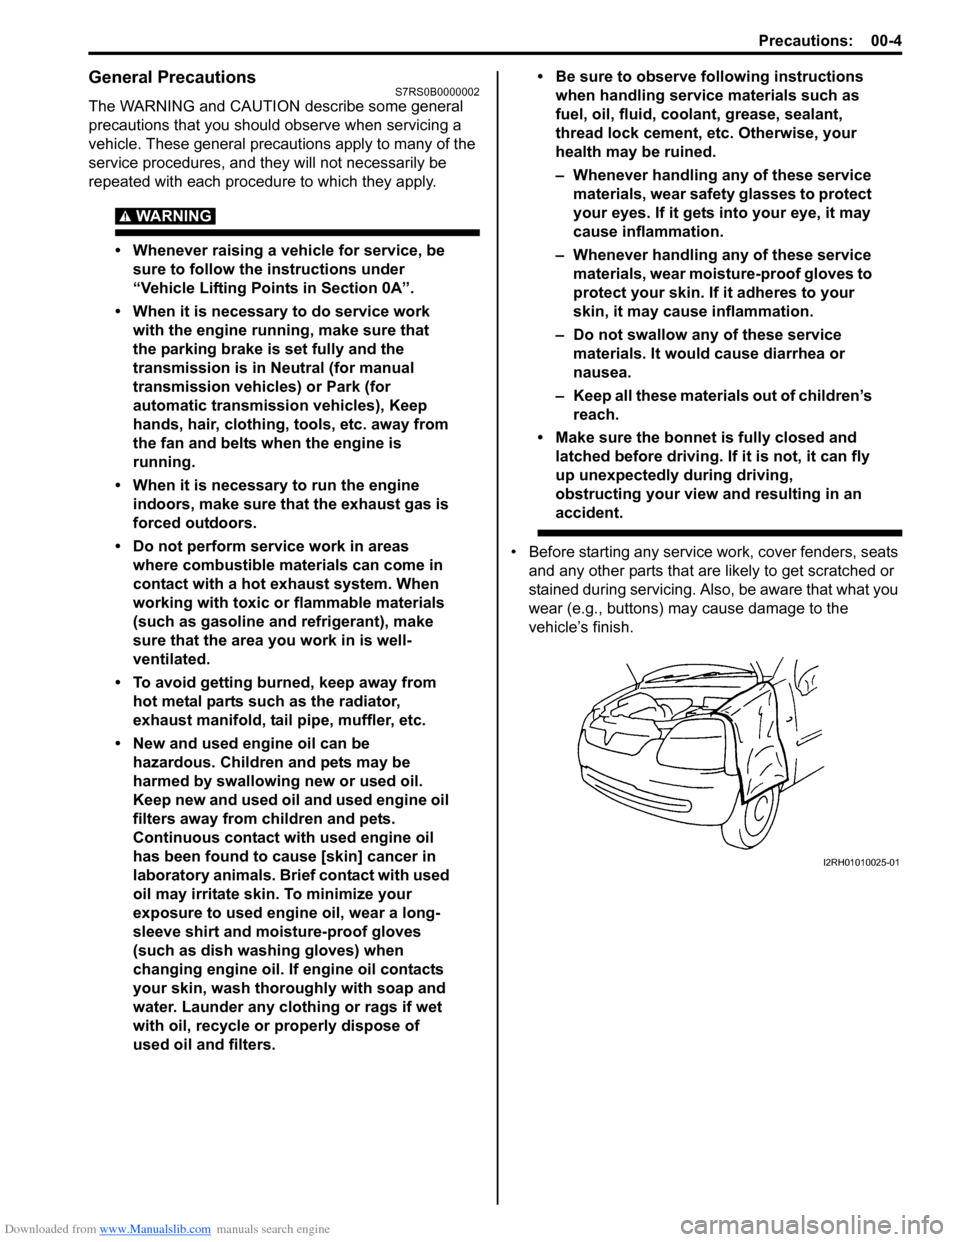 SUZUKI SWIFT 2006 2.G Service Workshop Manual Downloaded from www.Manualslib.com manuals search engine Precautions: 00-4
General PrecautionsS7RS0B0000002
The WARNING and CAUTION describe some general 
precautions that you should observe when serv